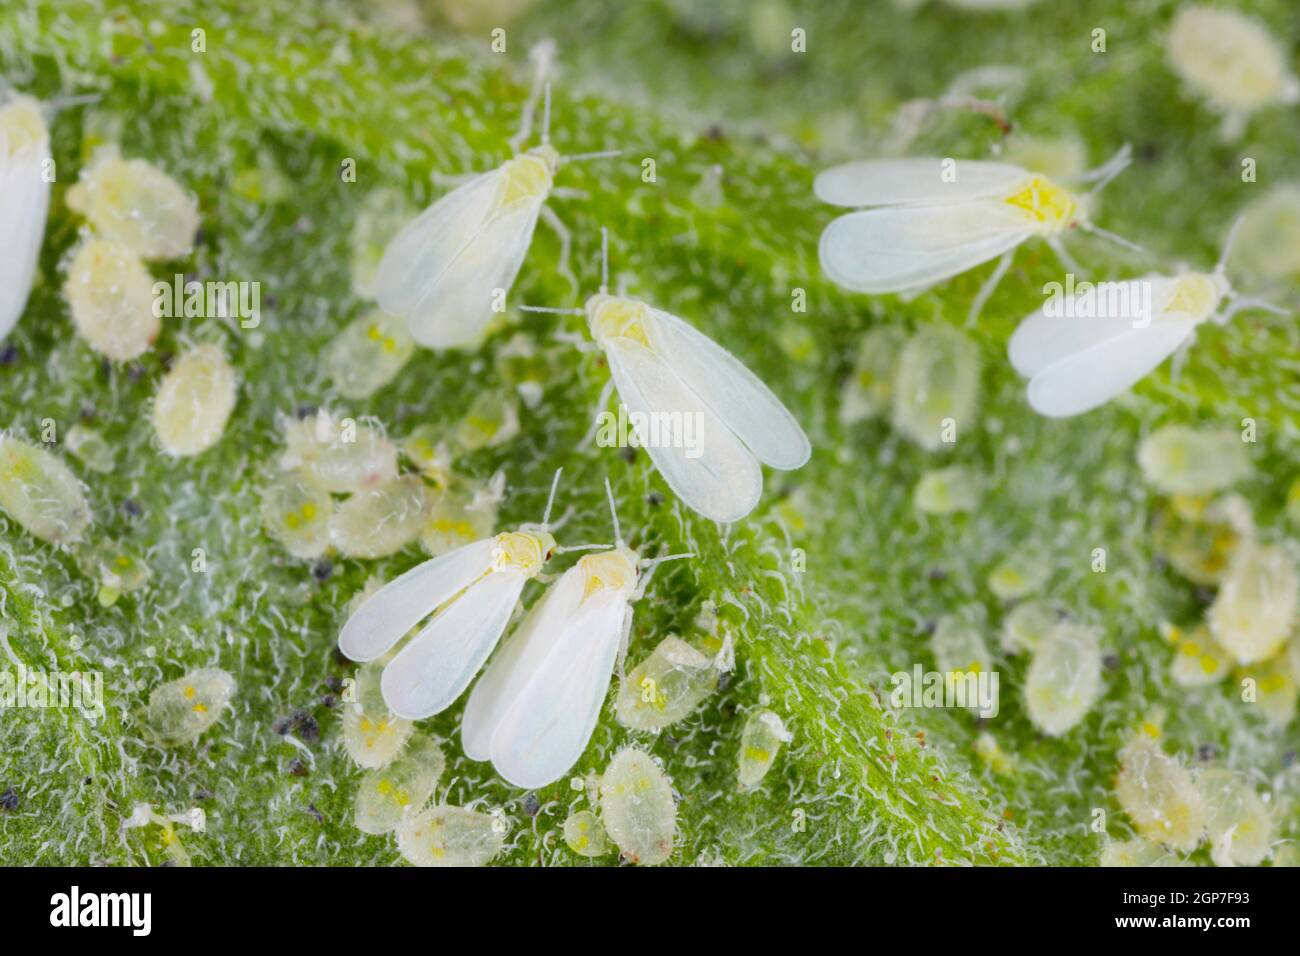 Adults, larvae and pupae of Glasshouse whitefly (Trialeurodes vaporariorum) on the underside of tomato leaves. Stock Photo